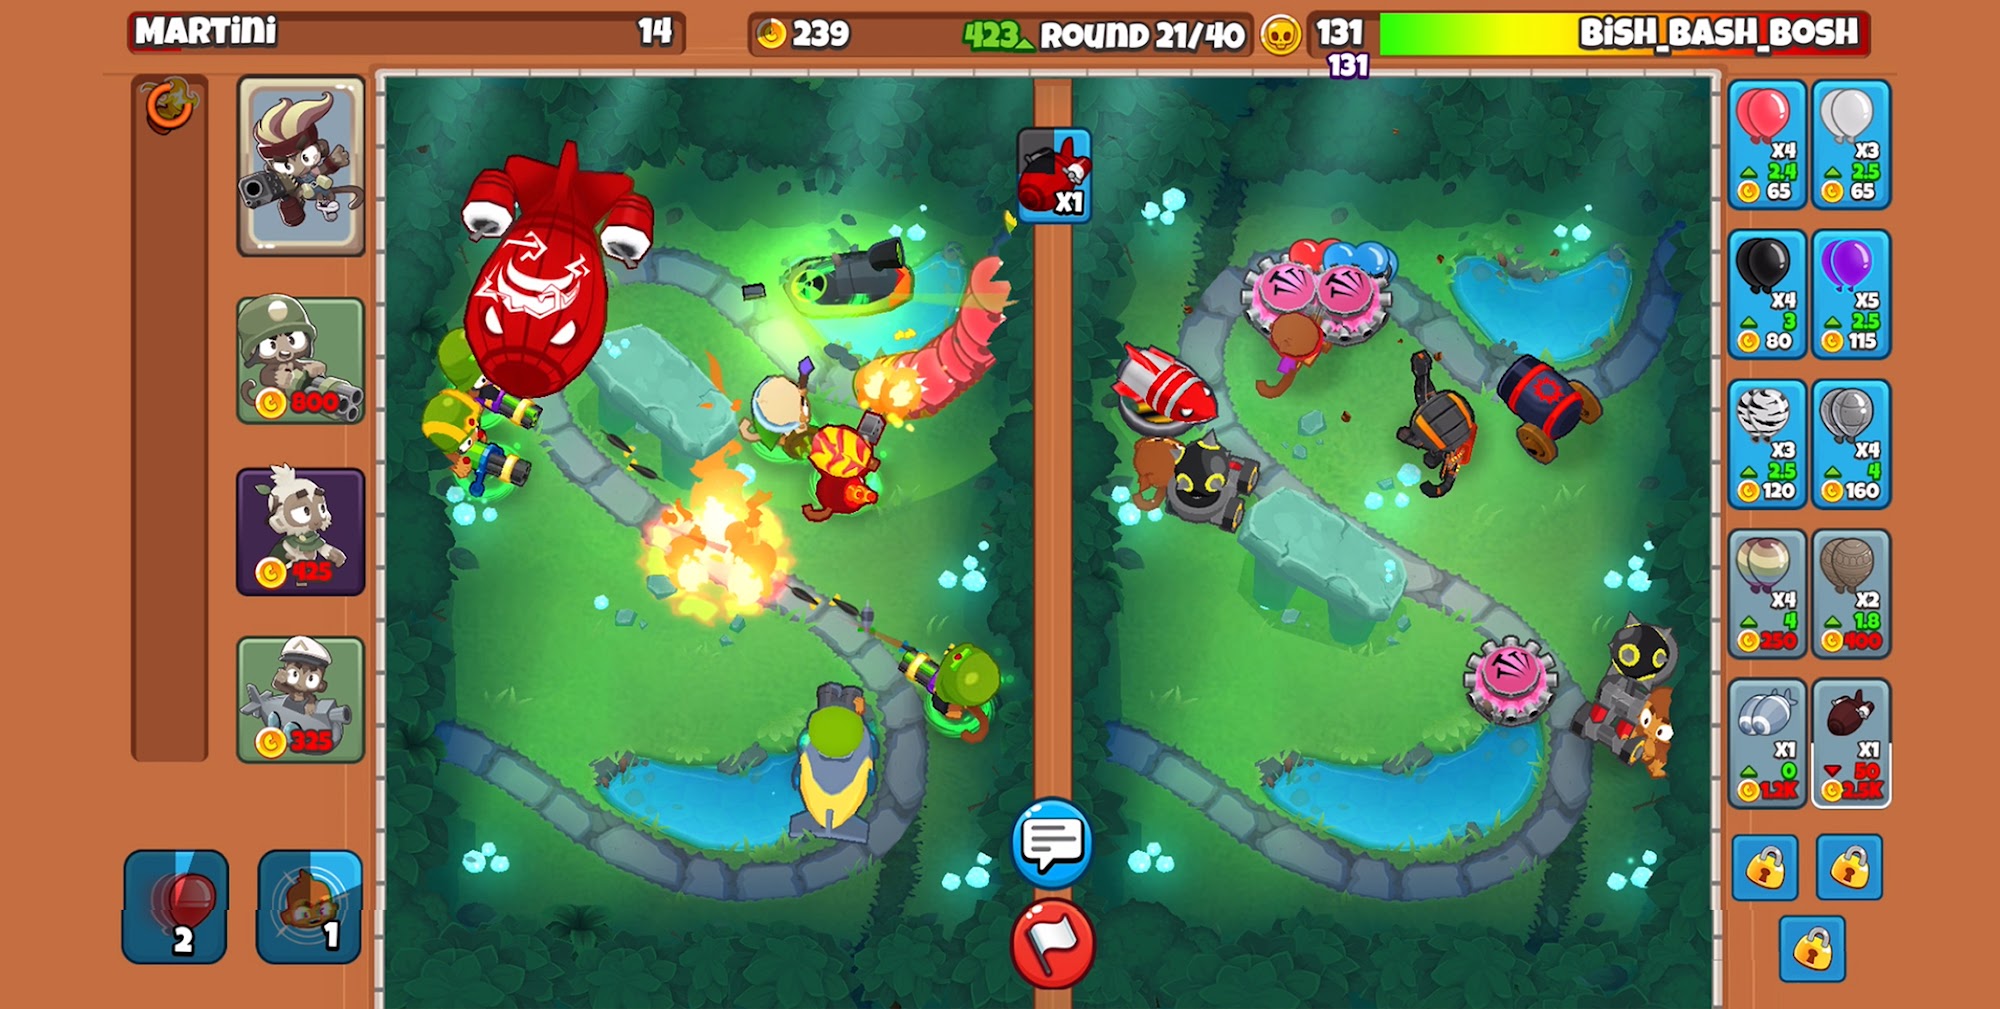 Gameplay of the Bloons TD Battles 2 for Android phone or tablet.